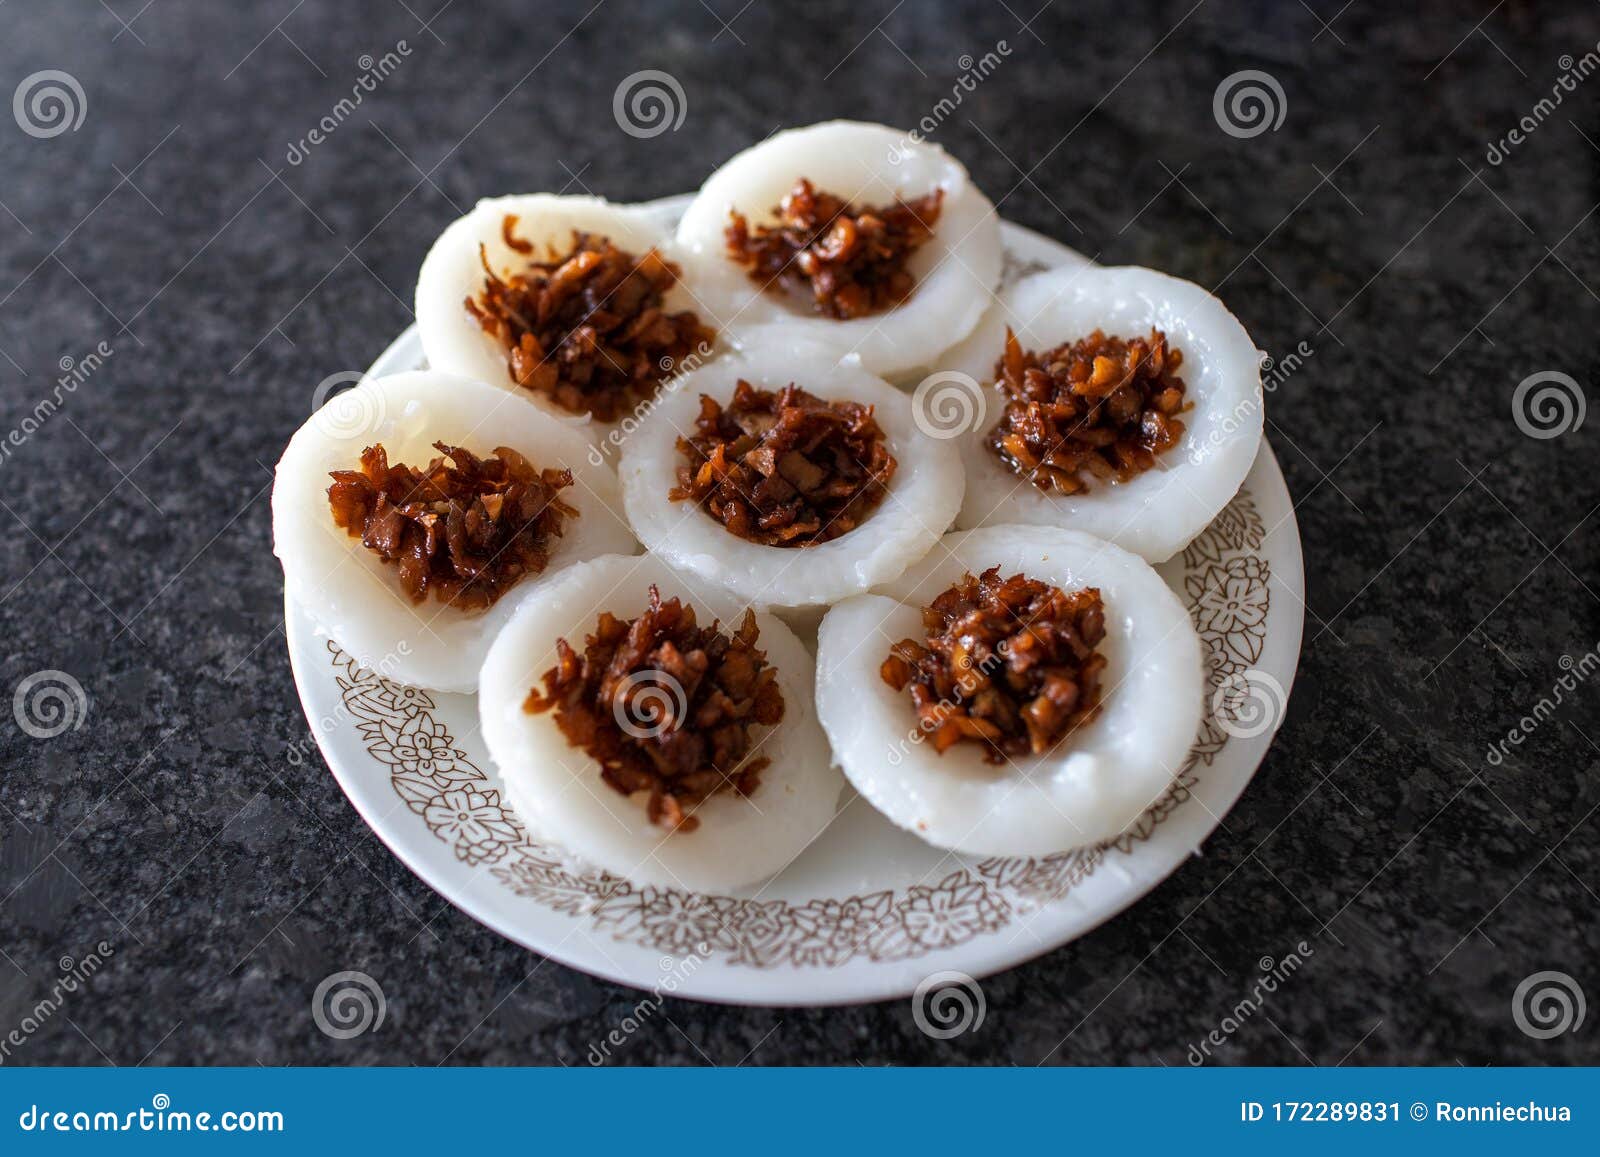 popular singapore breakfast chwee kueh steamed rice cake with preserved radish